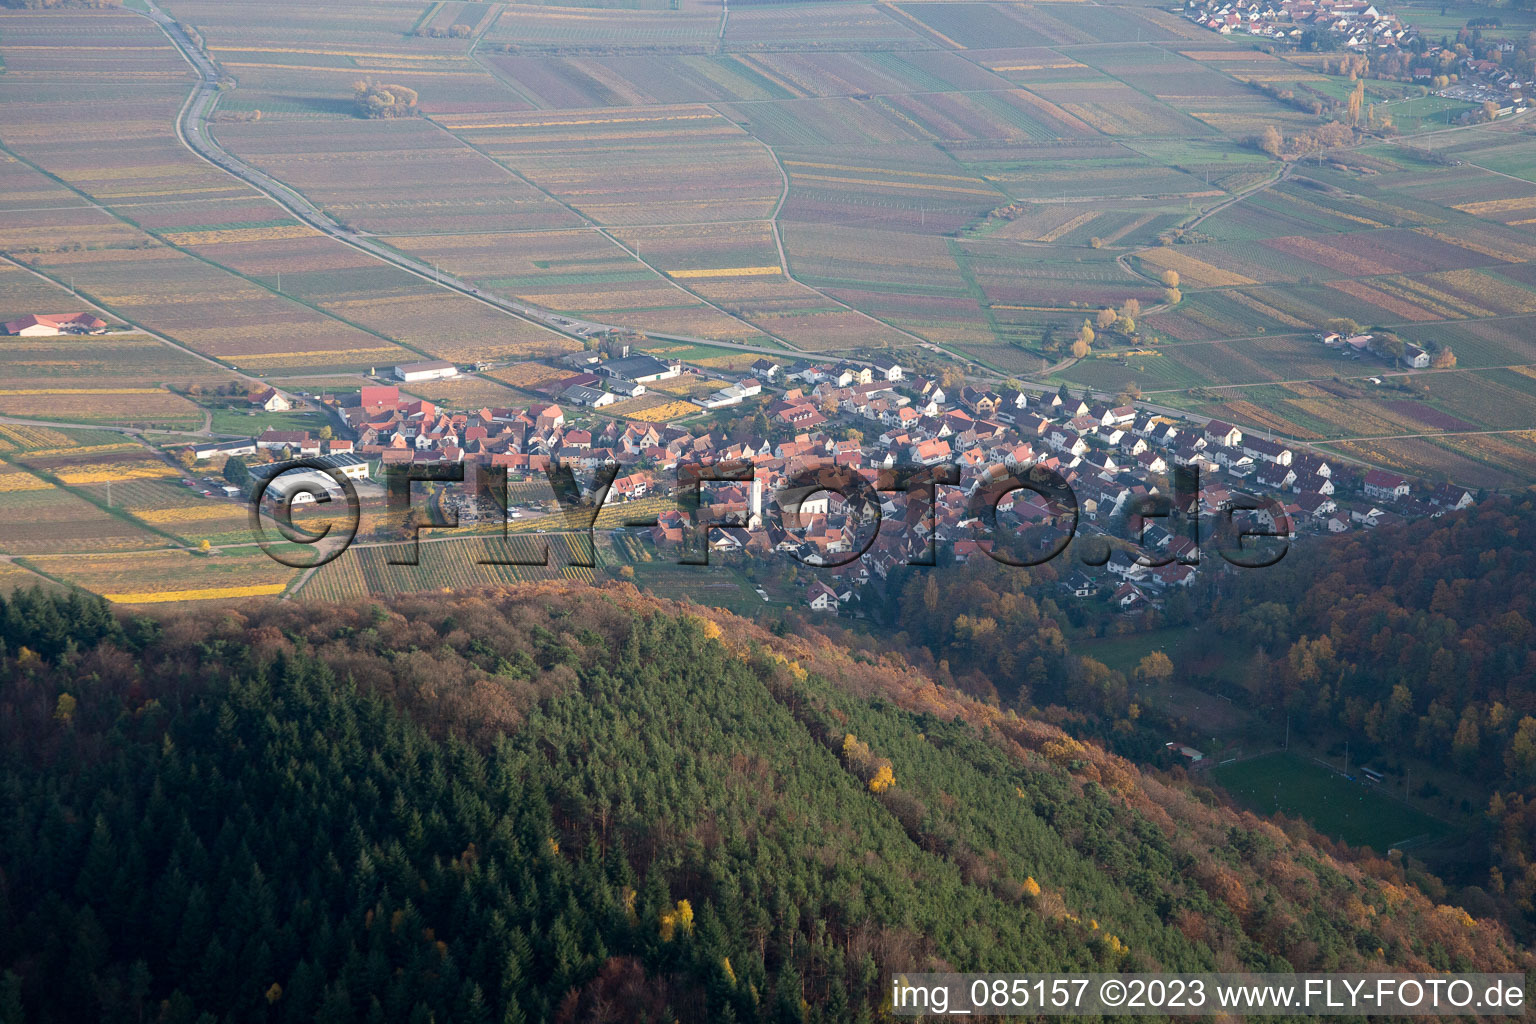 Eschbach in the state Rhineland-Palatinate, Germany seen from above